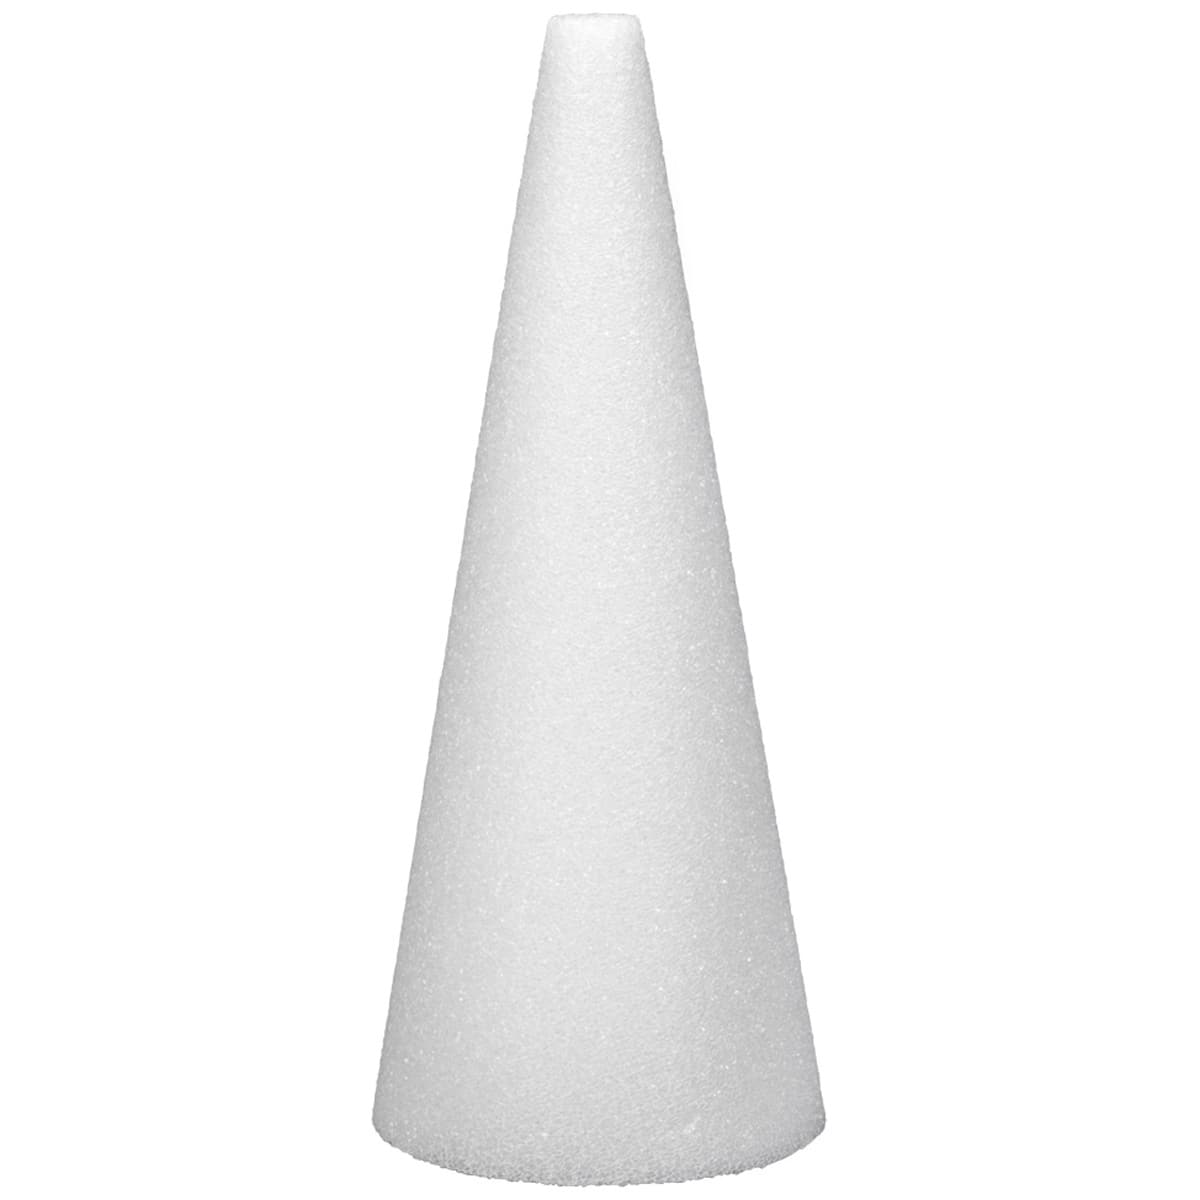 FloraCraft Packaged Styrofoam Cones, 12-Inch-by-4-Inch Cone